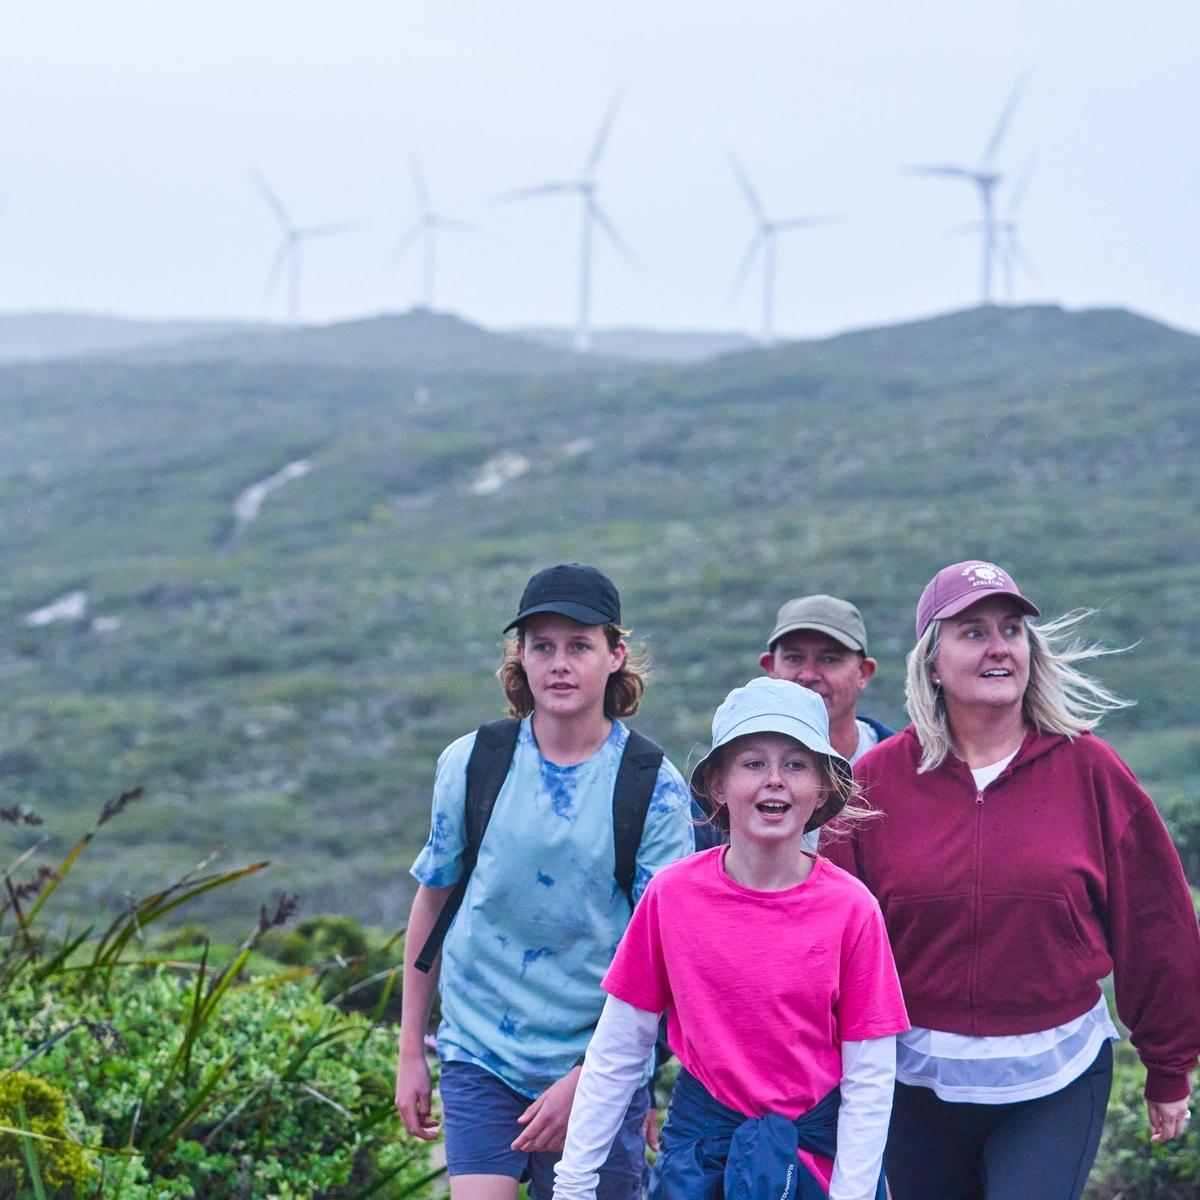 A family takes a walk at Albany wind farm with wind turbines in the distance